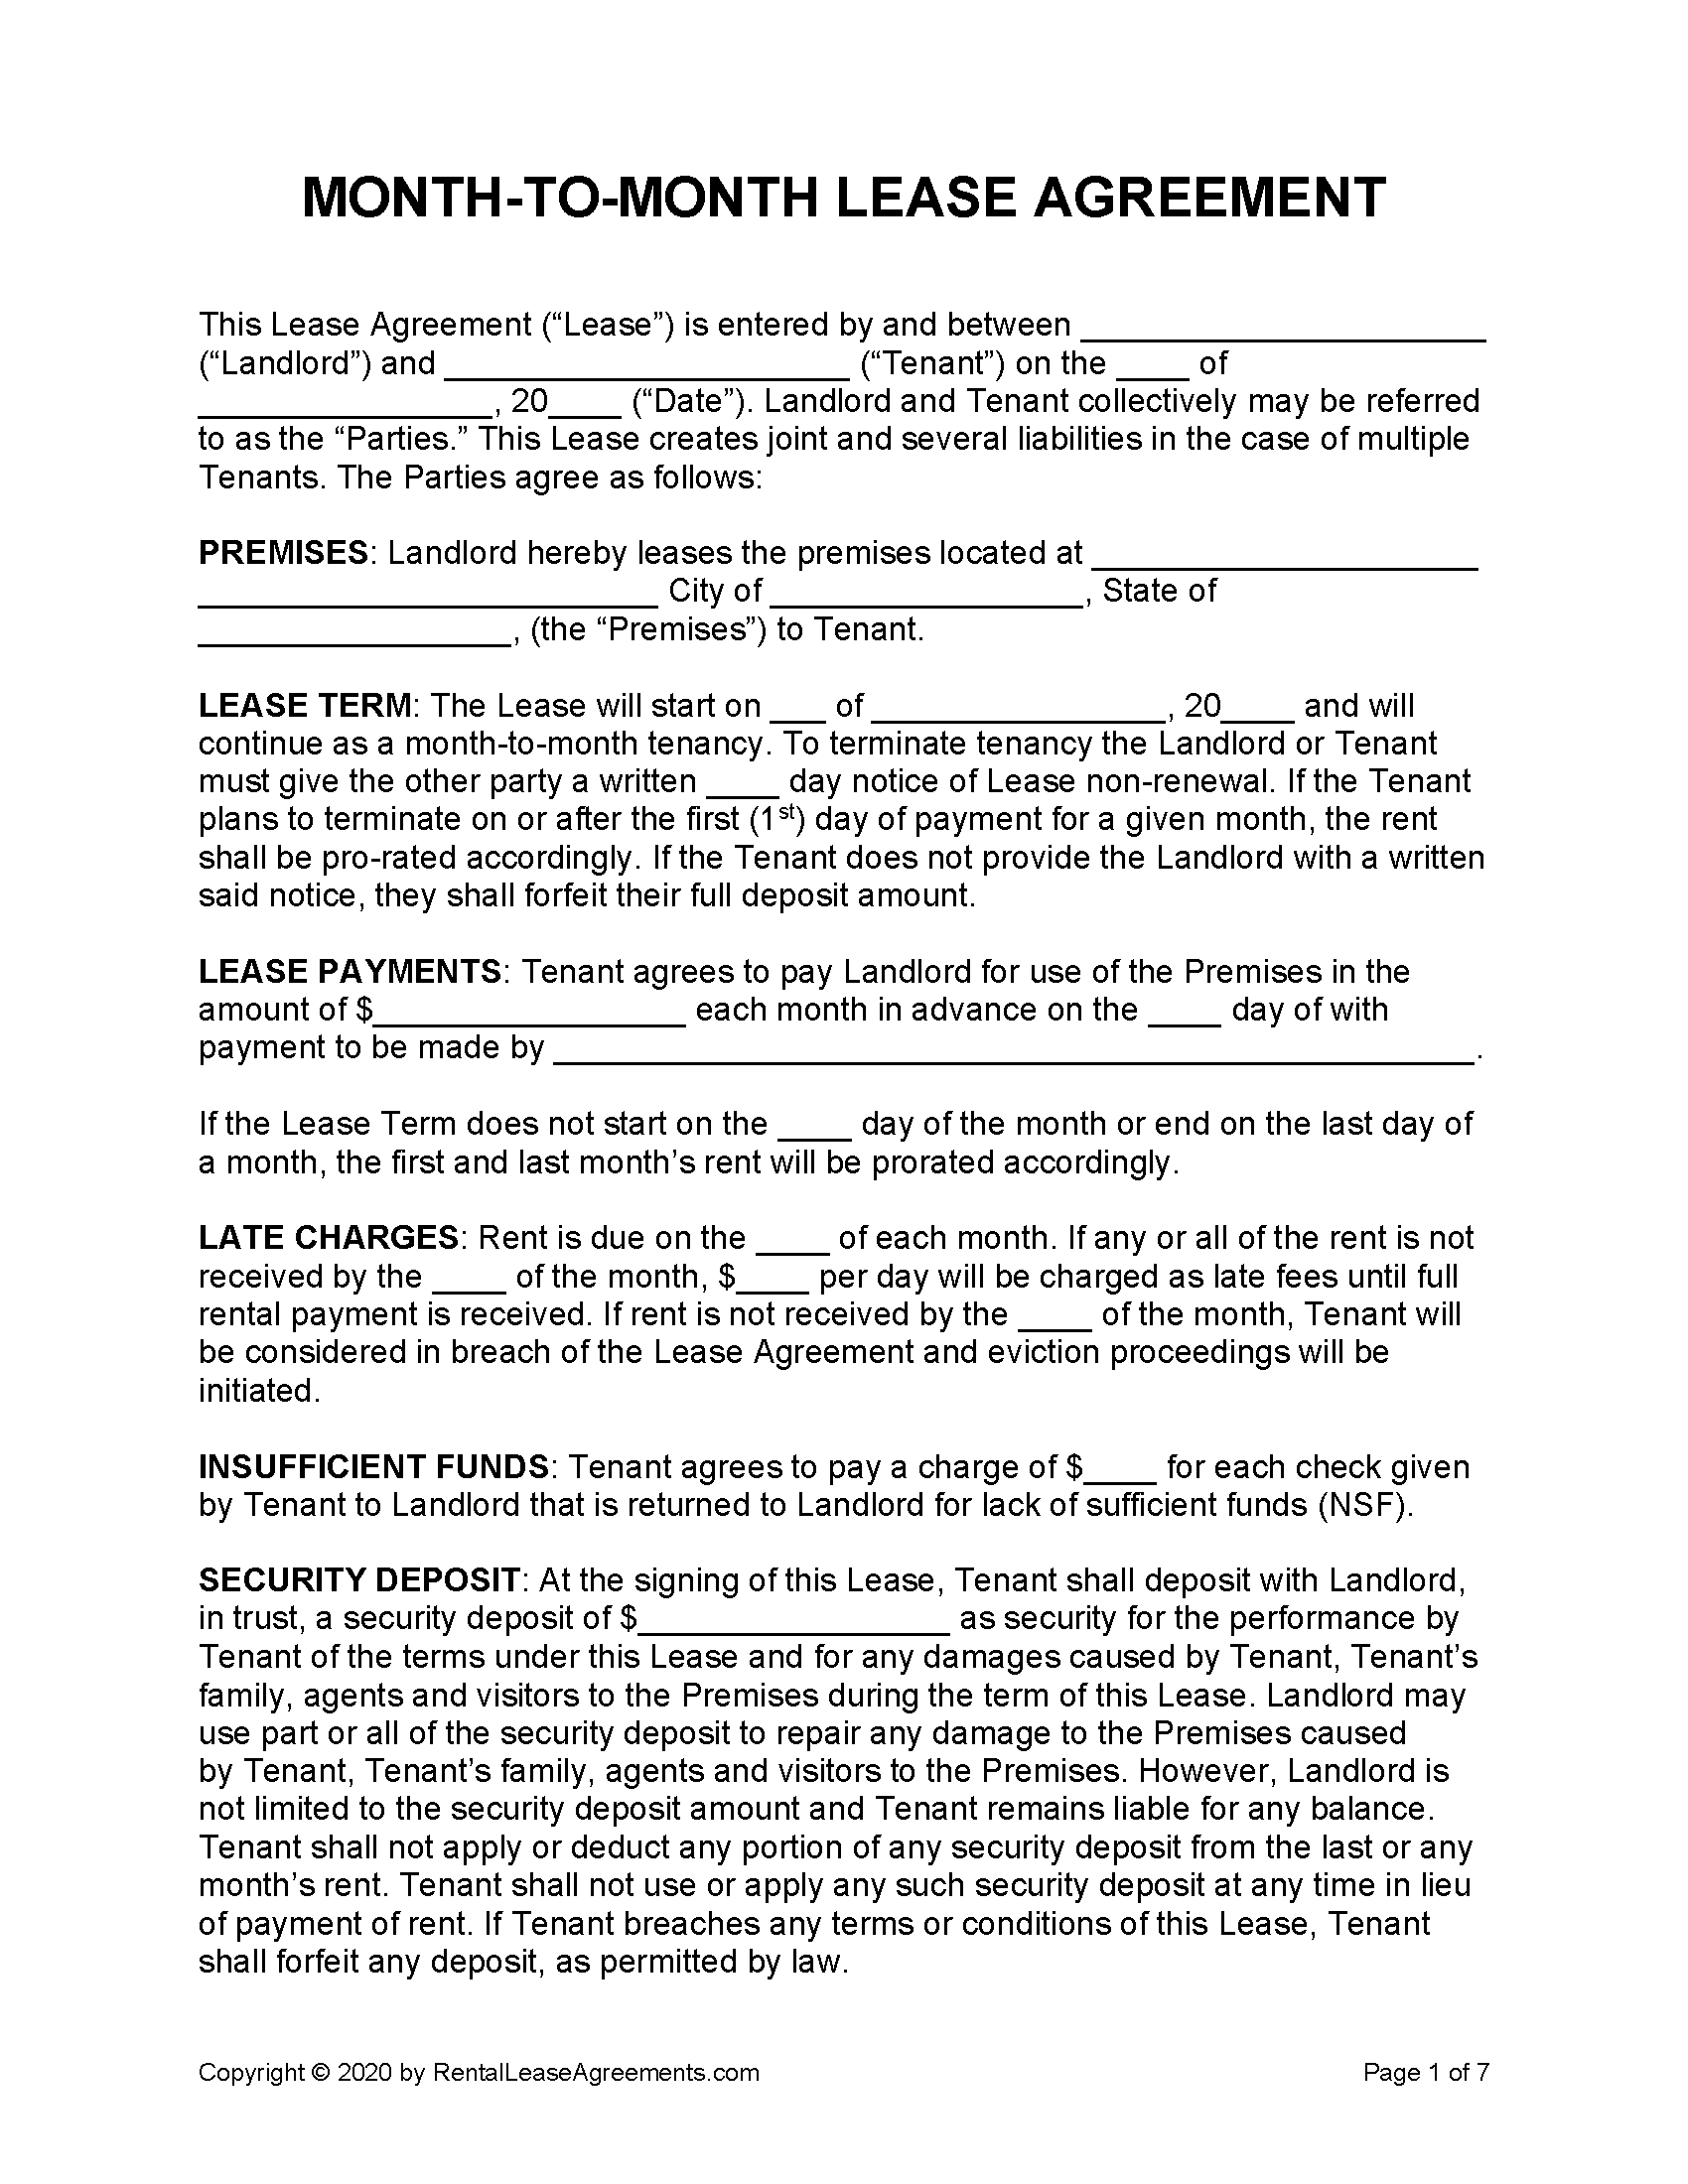 Free Month-to-Month Rental Agreement  PDF - Word With yearly rental agreement template